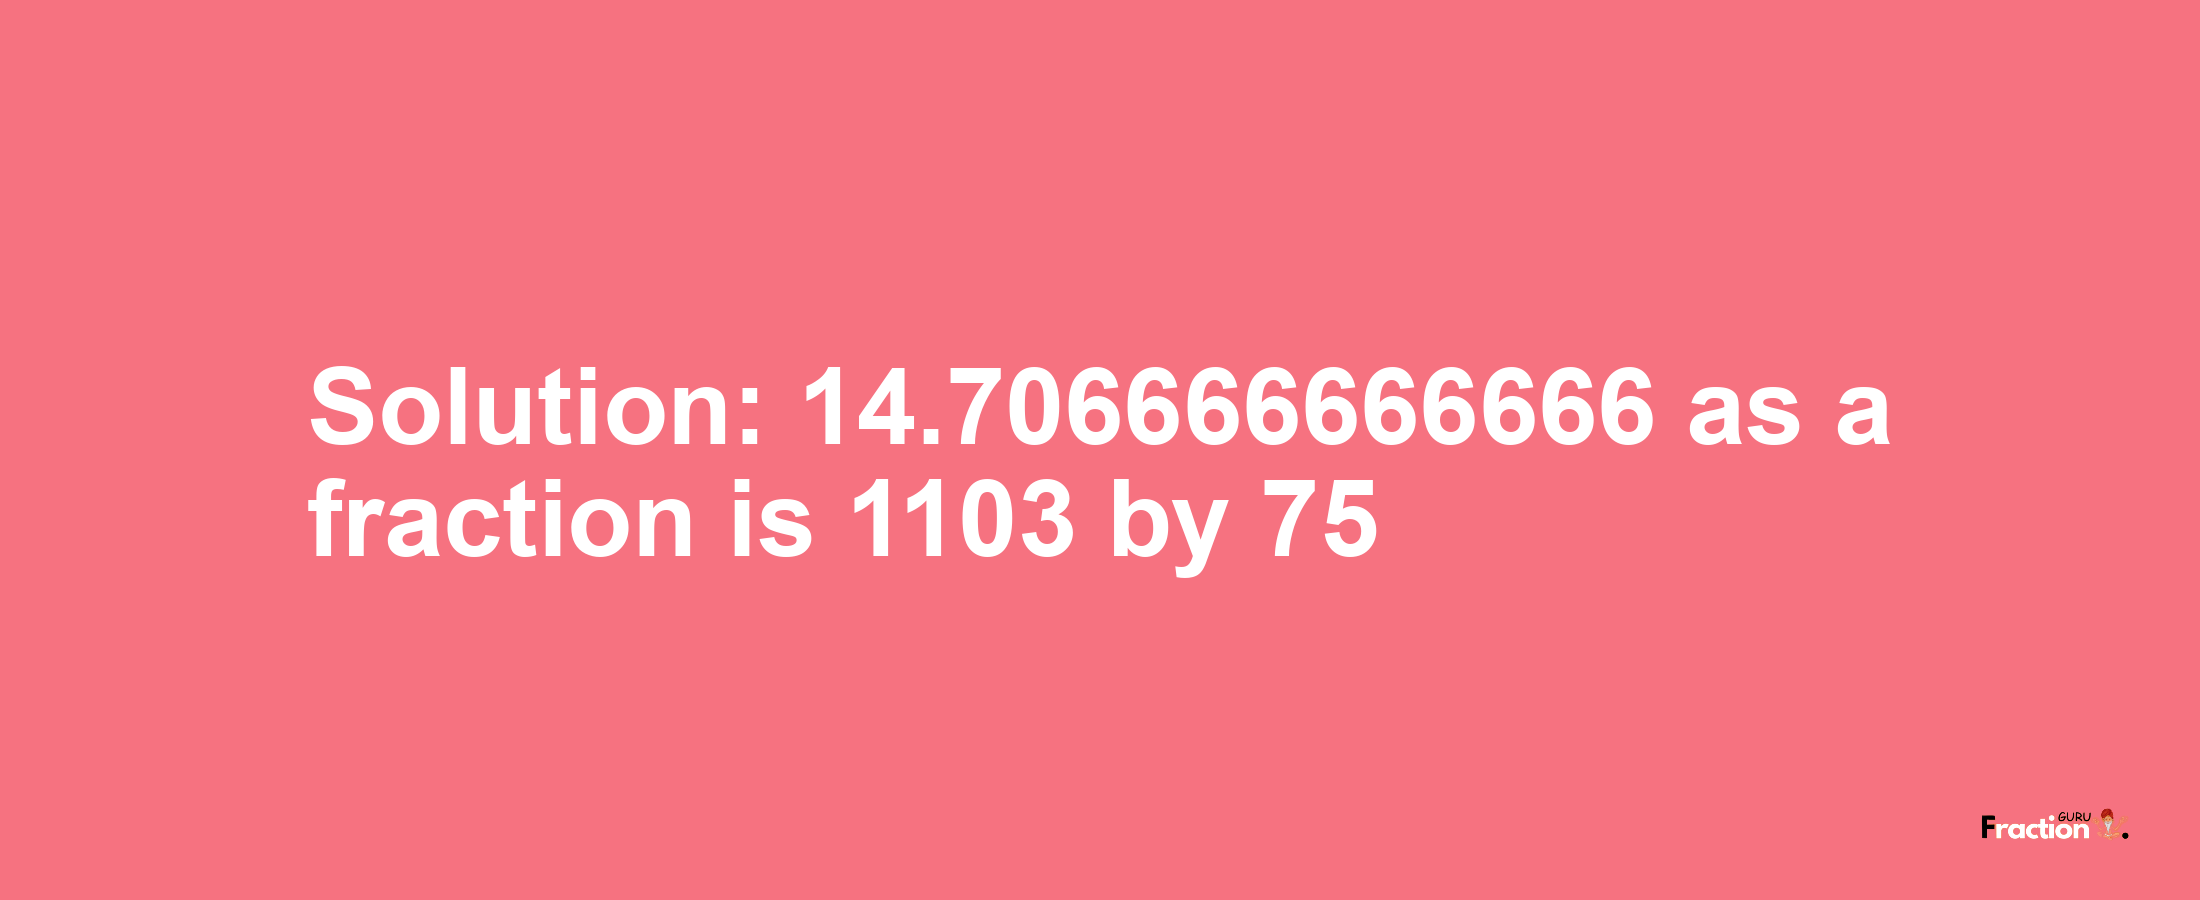 Solution:14.706666666666 as a fraction is 1103/75